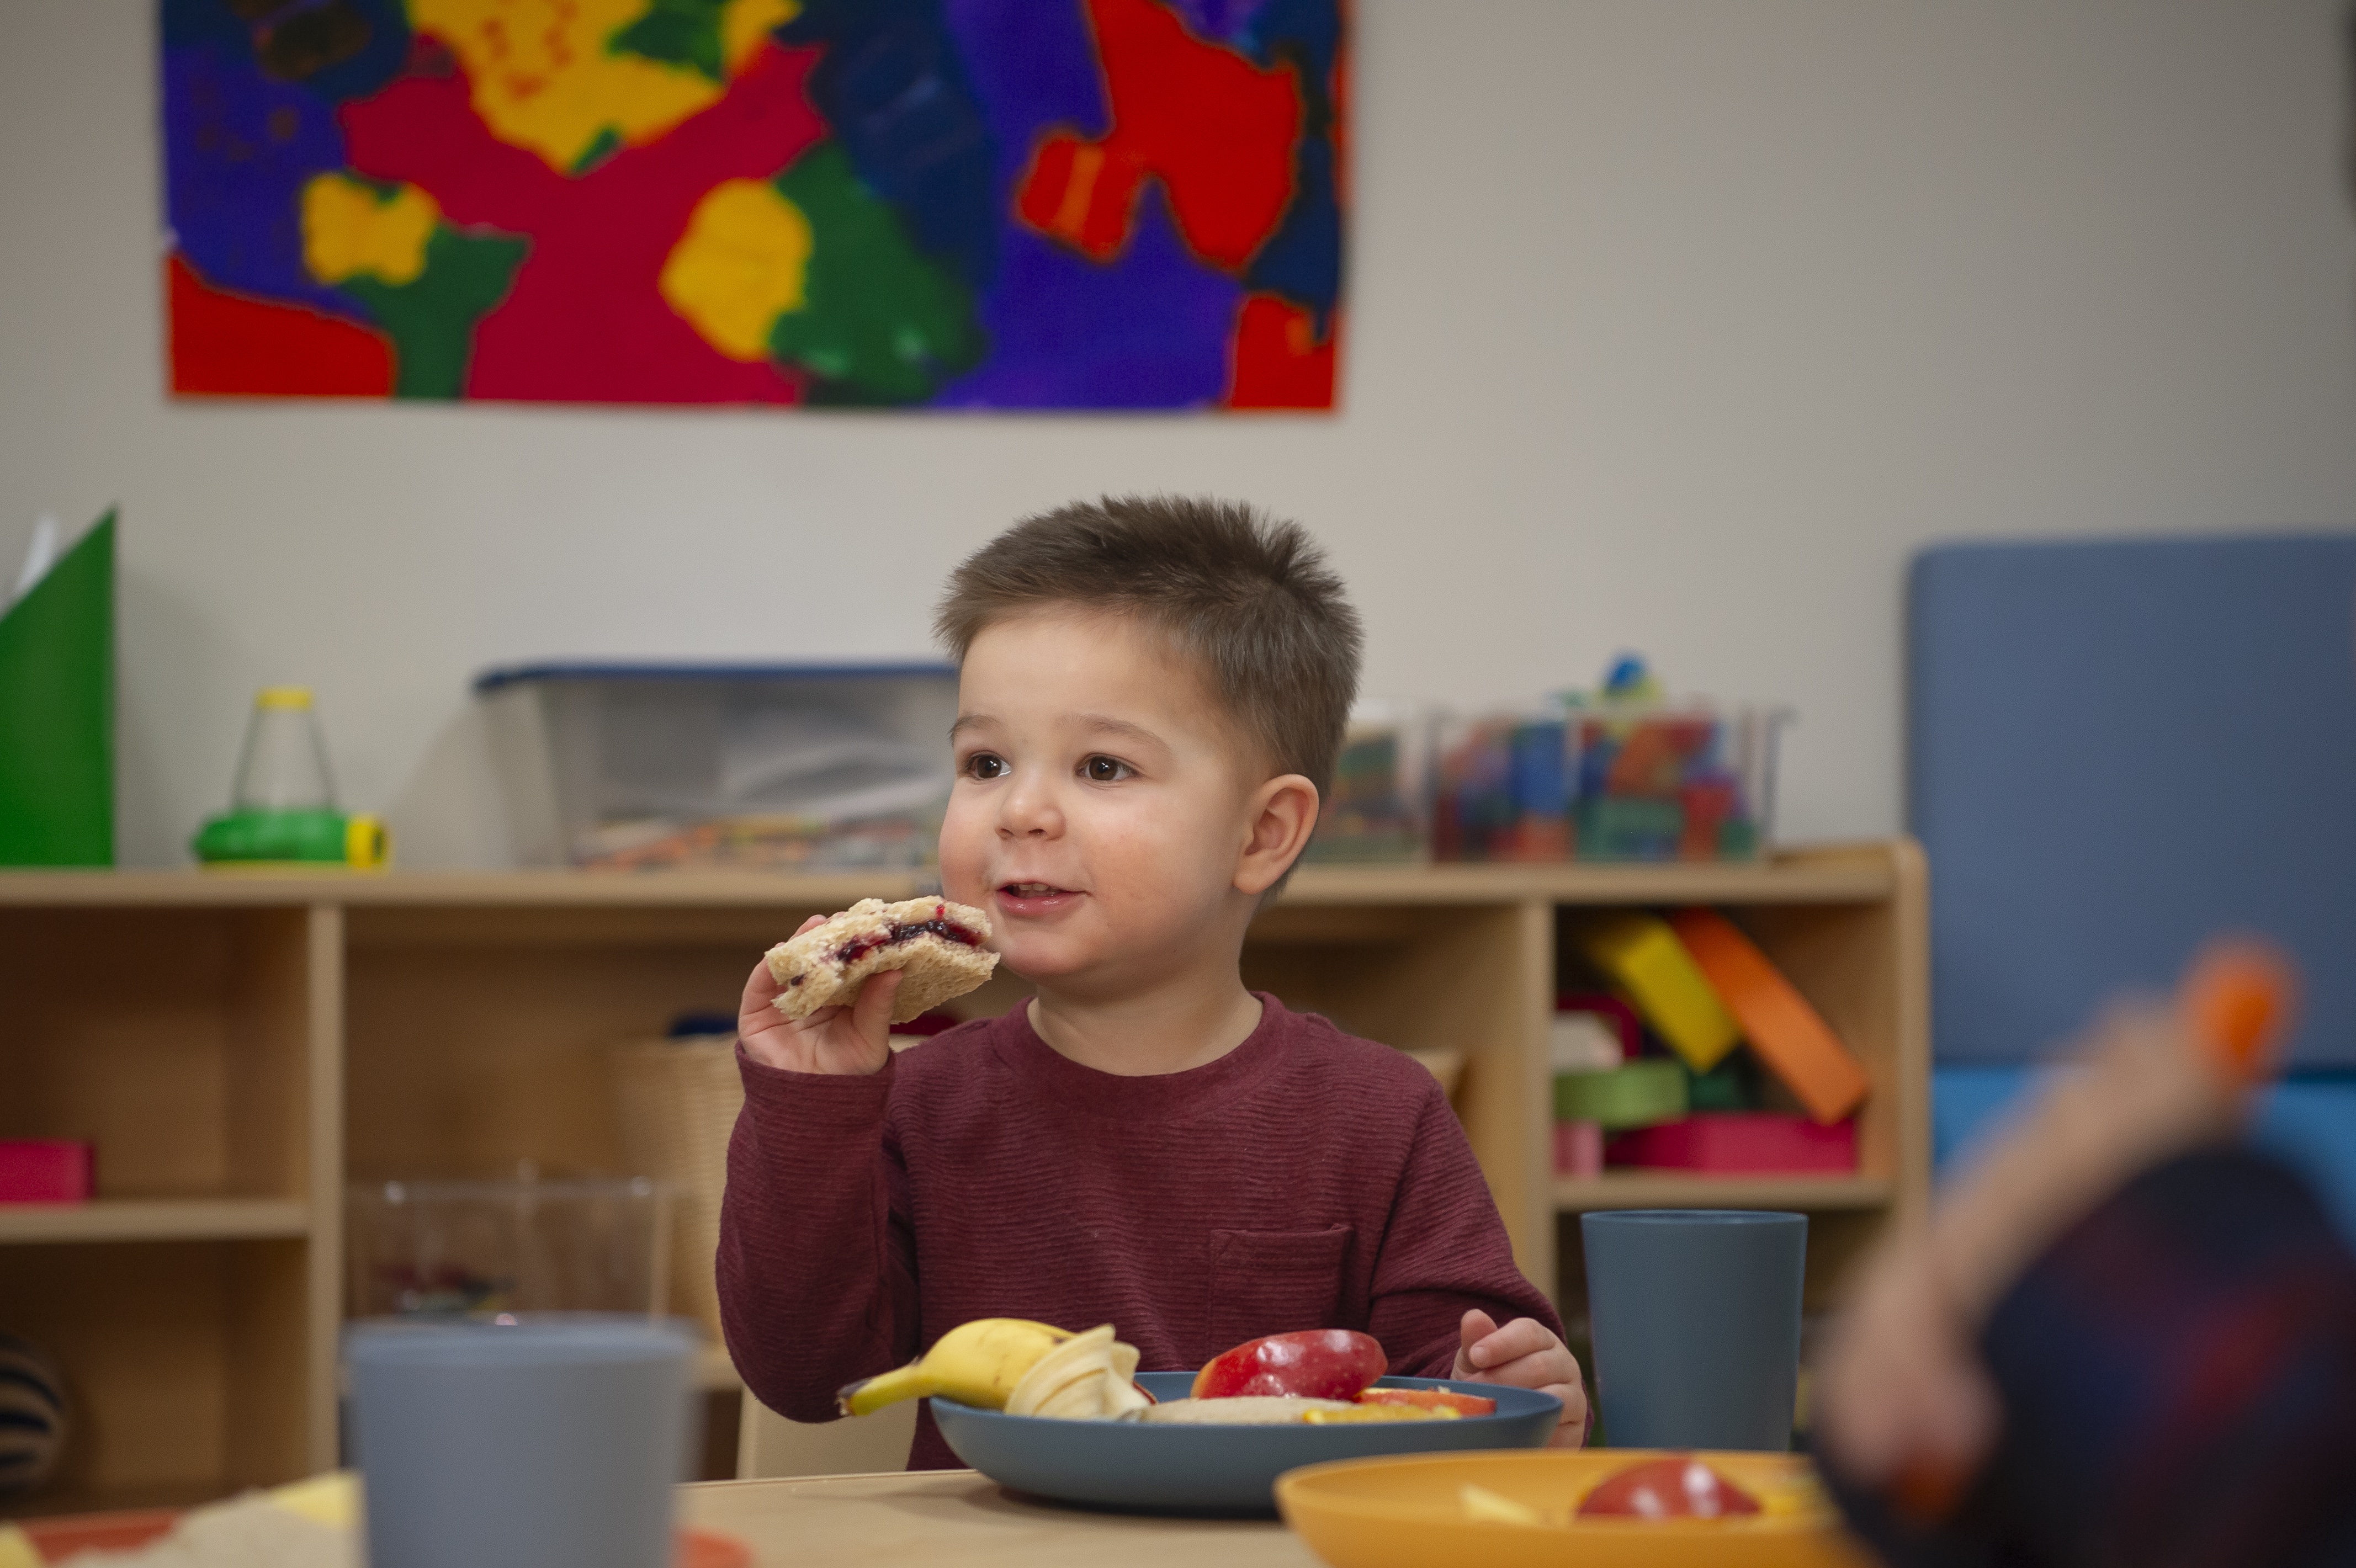 A young, toddler-aged boy with light skin and short brown hair is eating a peanut butter and jelly sandwich.